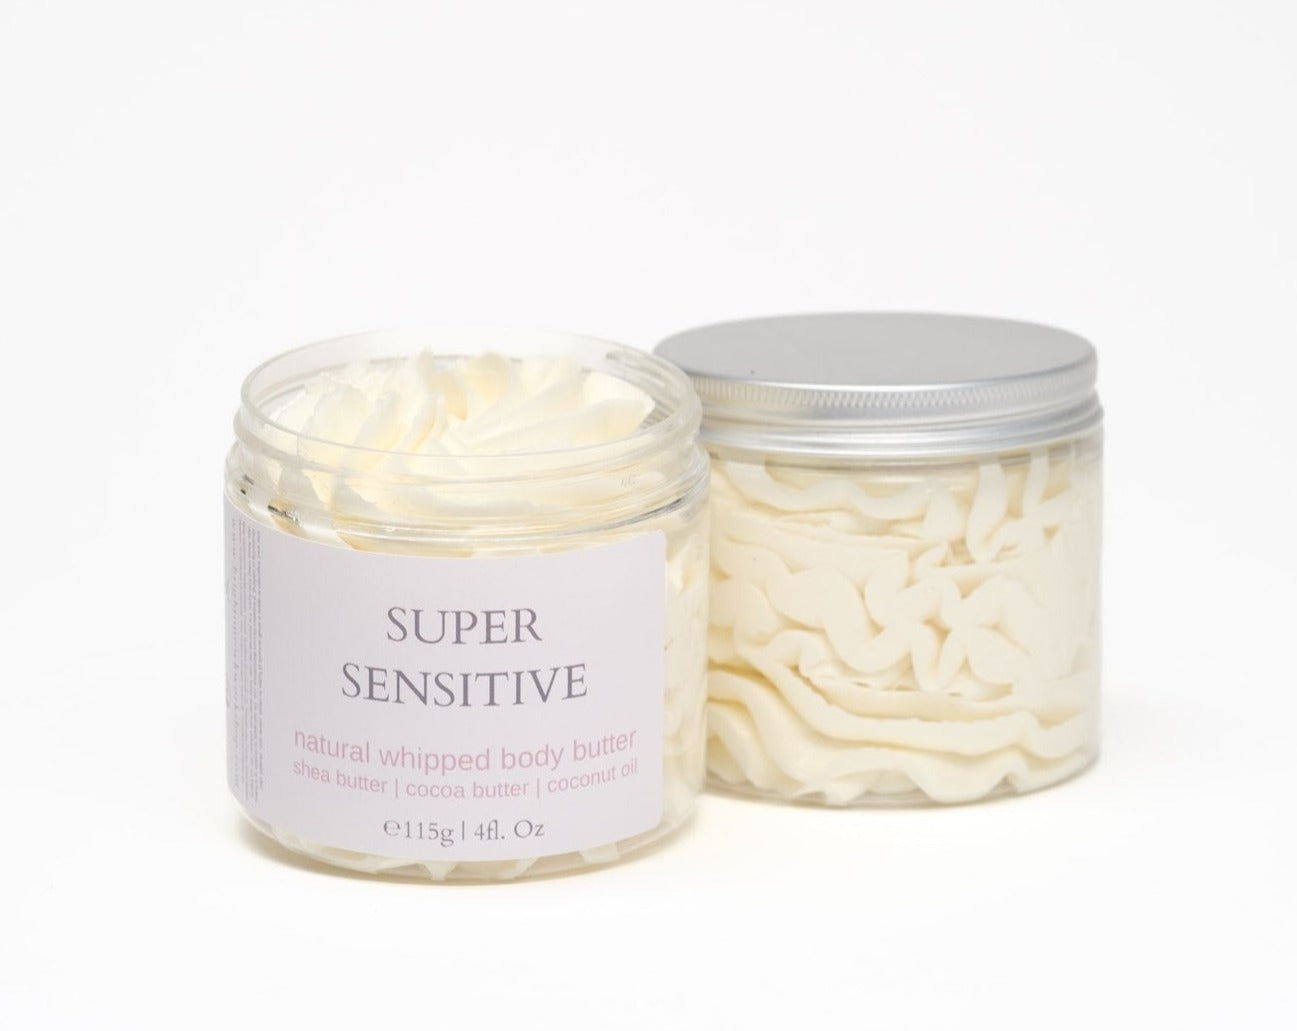 Super Sensitive Natural Whipped Body Butter